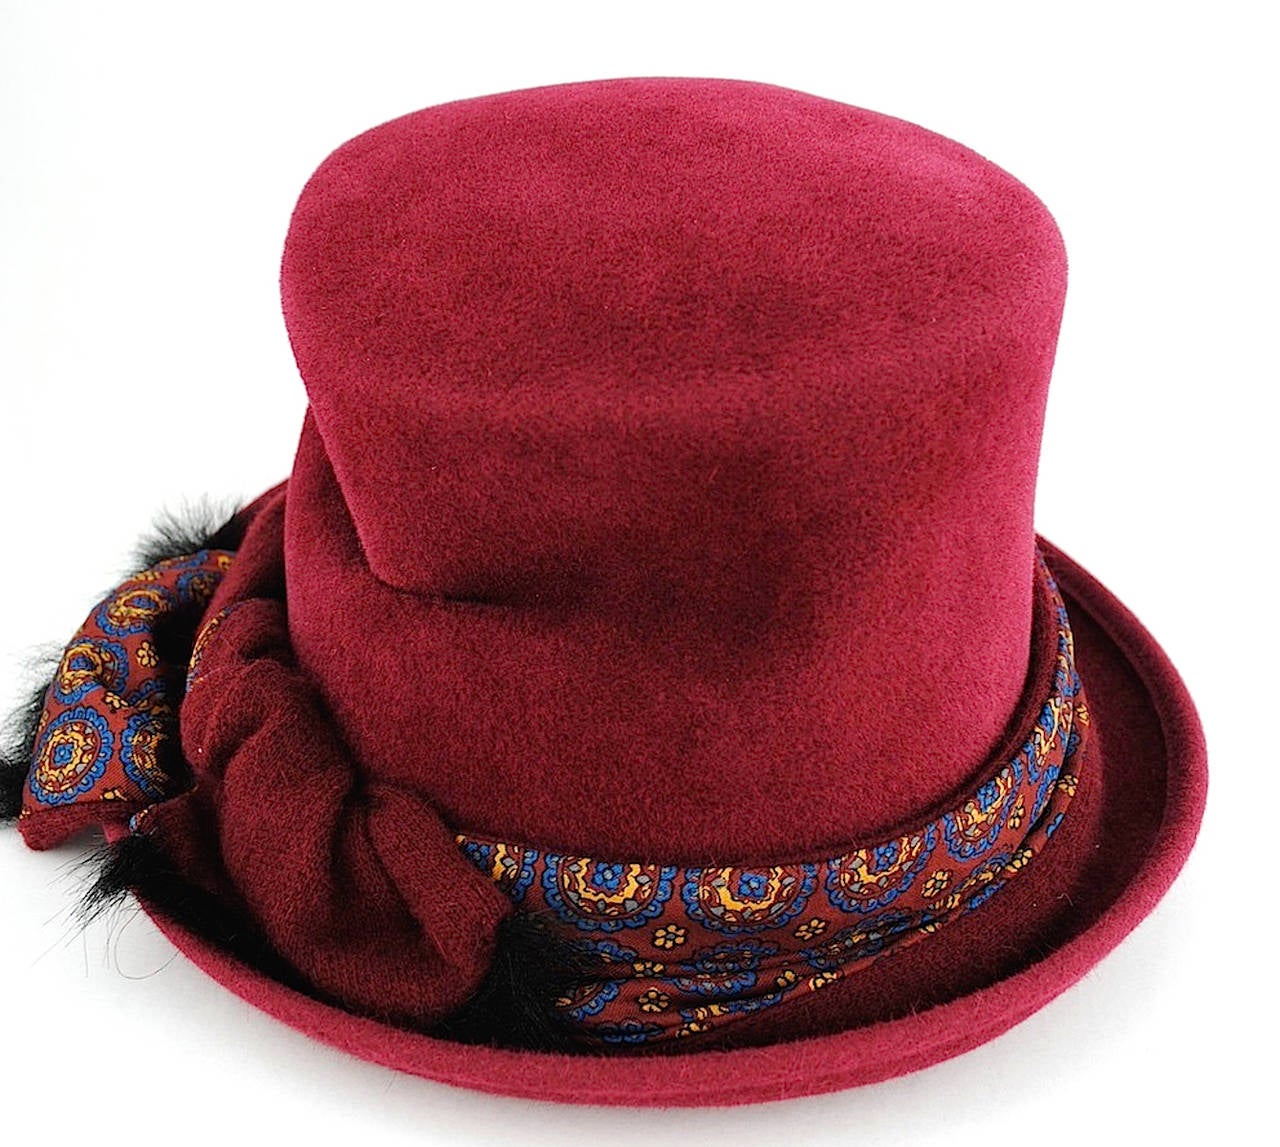 Stephen Jones ‘Jones Boy’ maroon felt hat. It features a short turned up rim, a scarf tied in a knot around the rim, a pinched design on the right side of the hat and black lining with a repeated print of the Stephen Jones